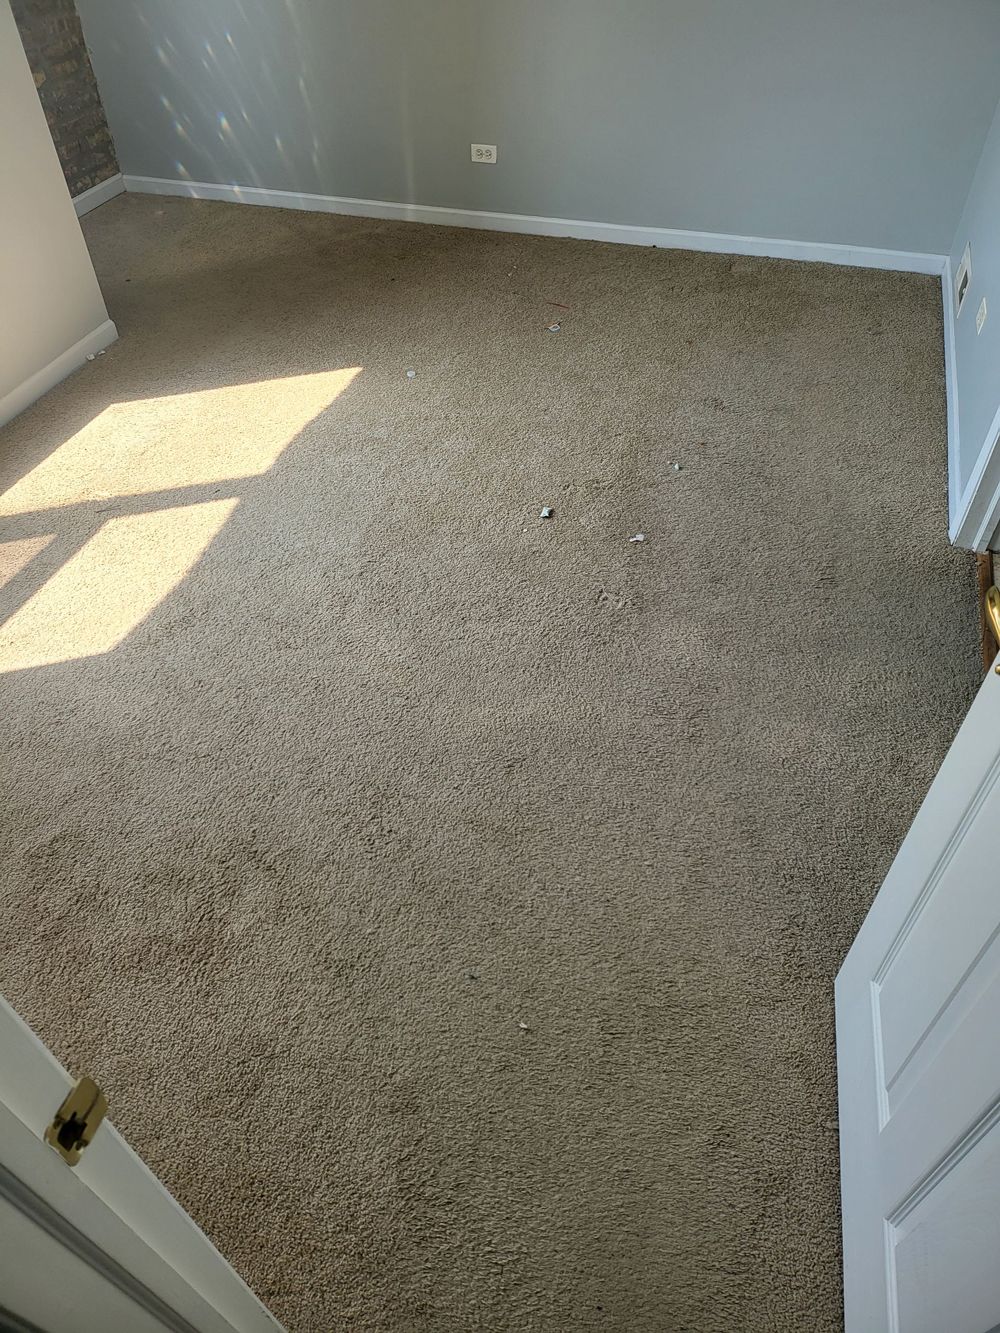 Before image of a room with a carpeted floor and a door